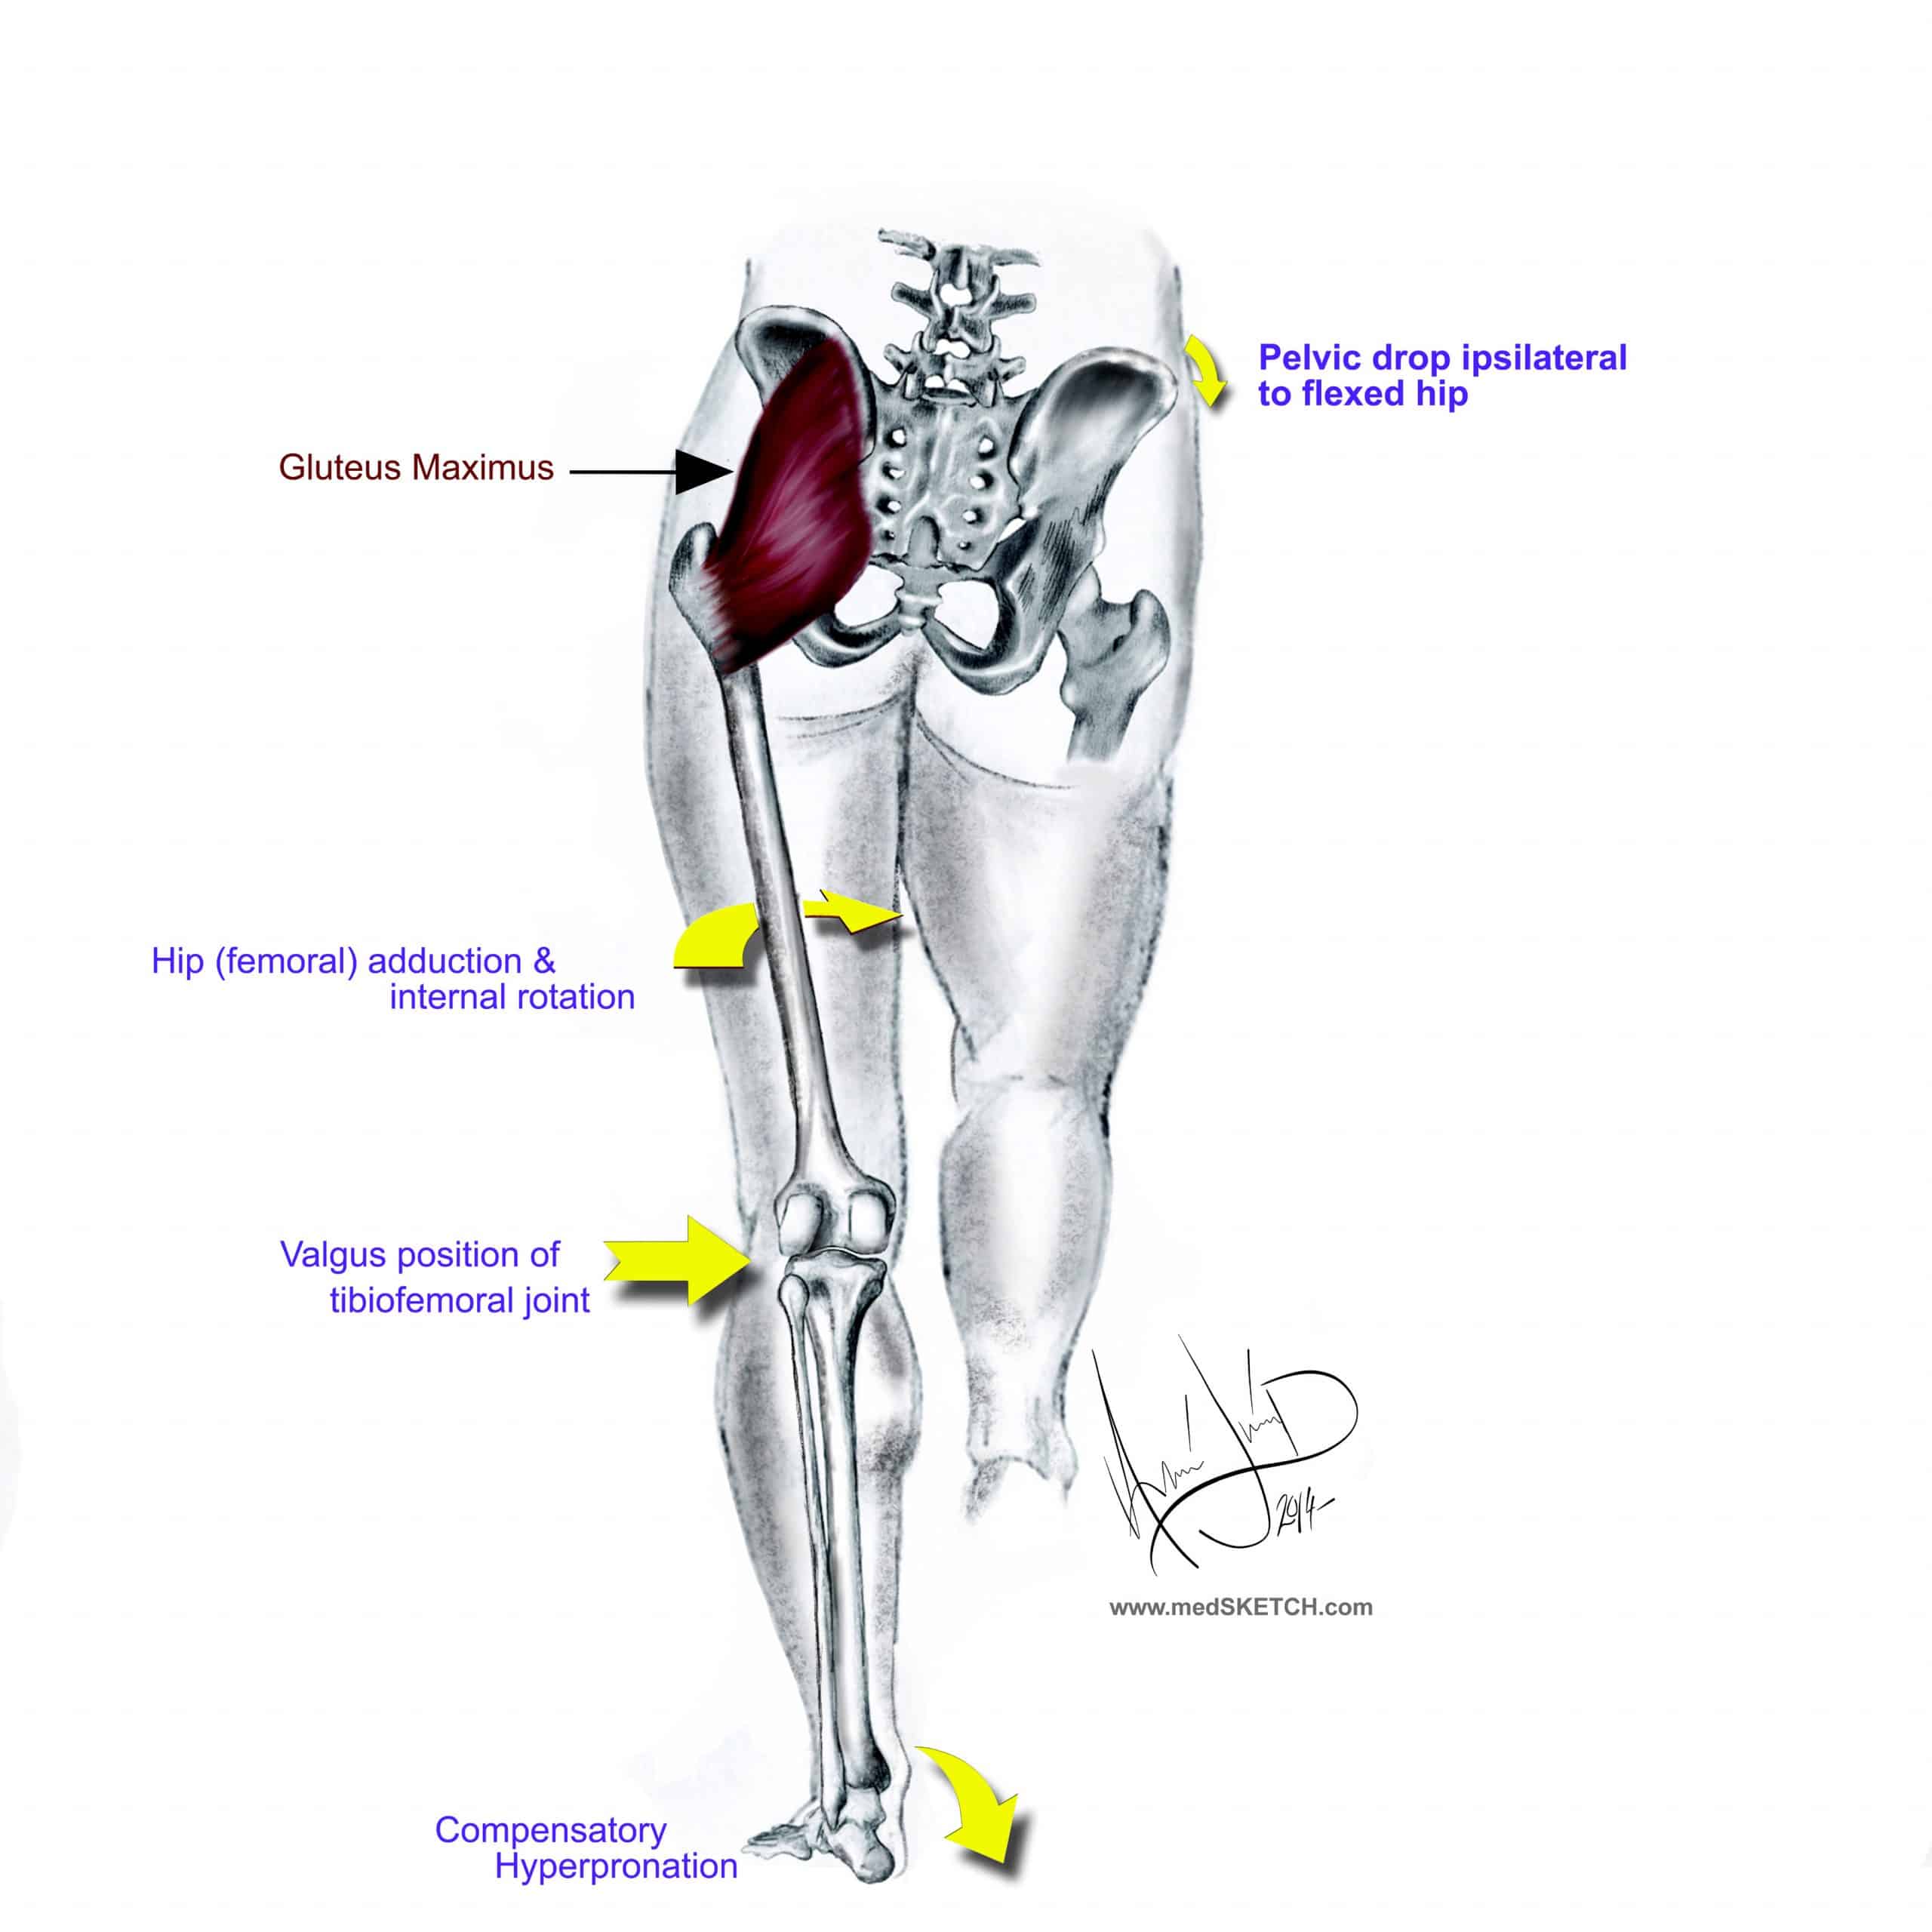 The Gluteal